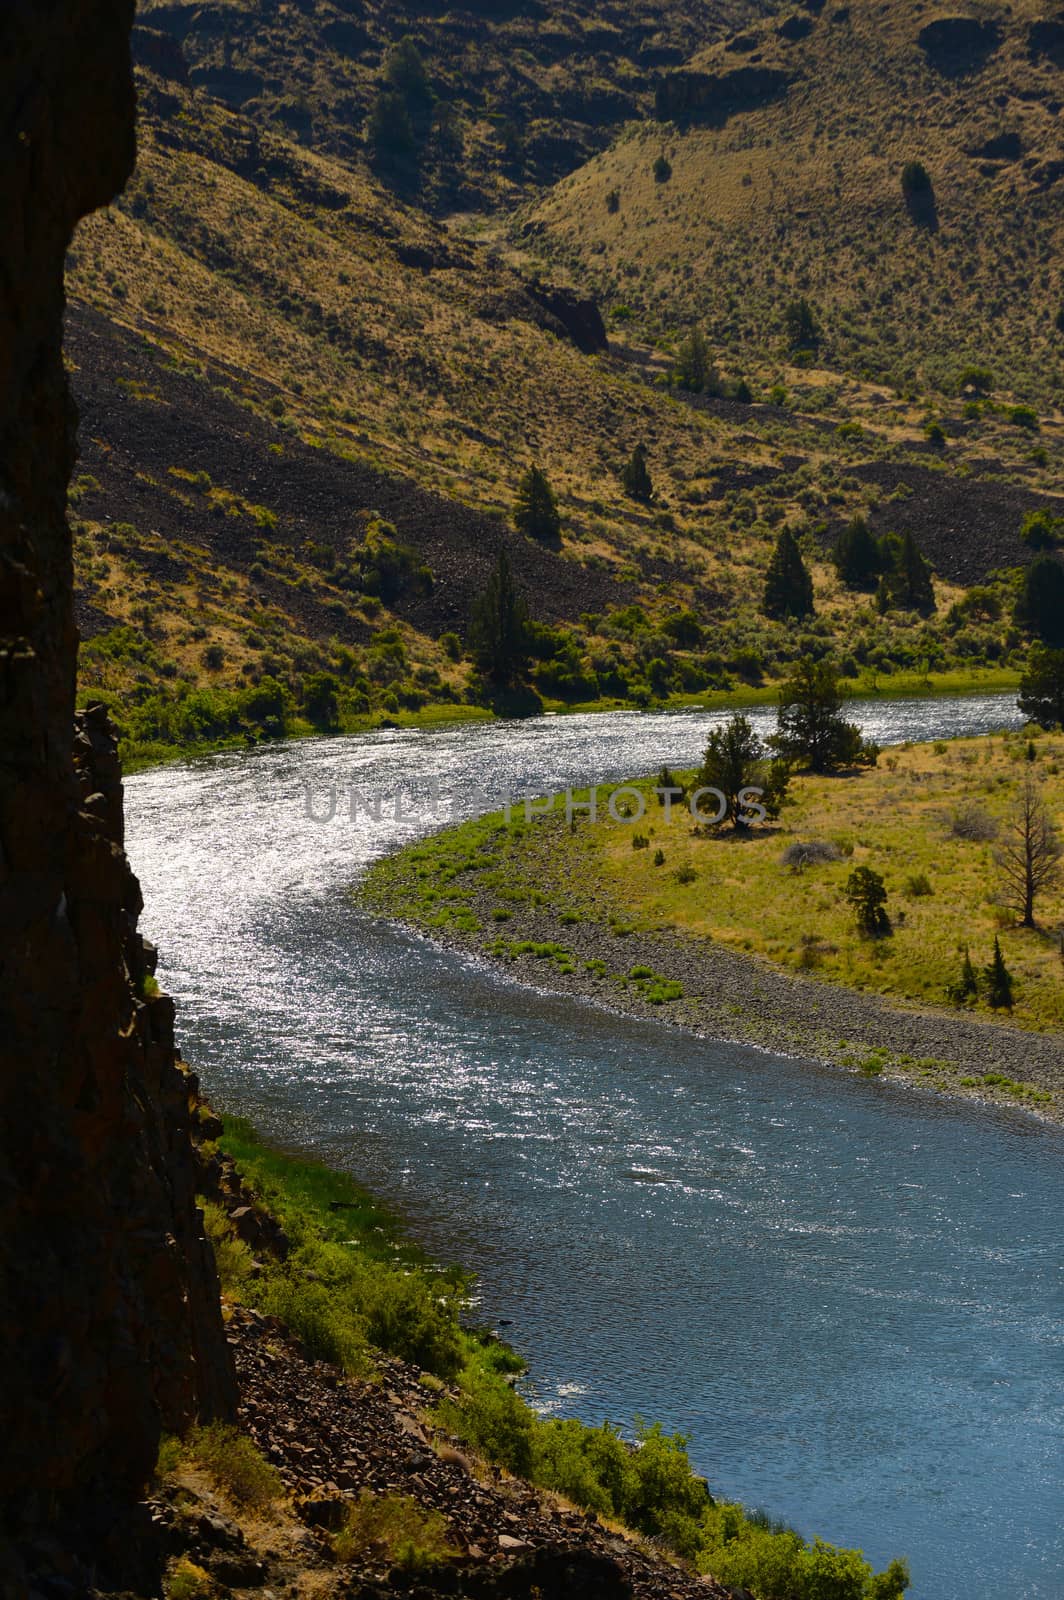 Oregon landscape with mountains, trees and river in a beautiful  by ftlaudgirl